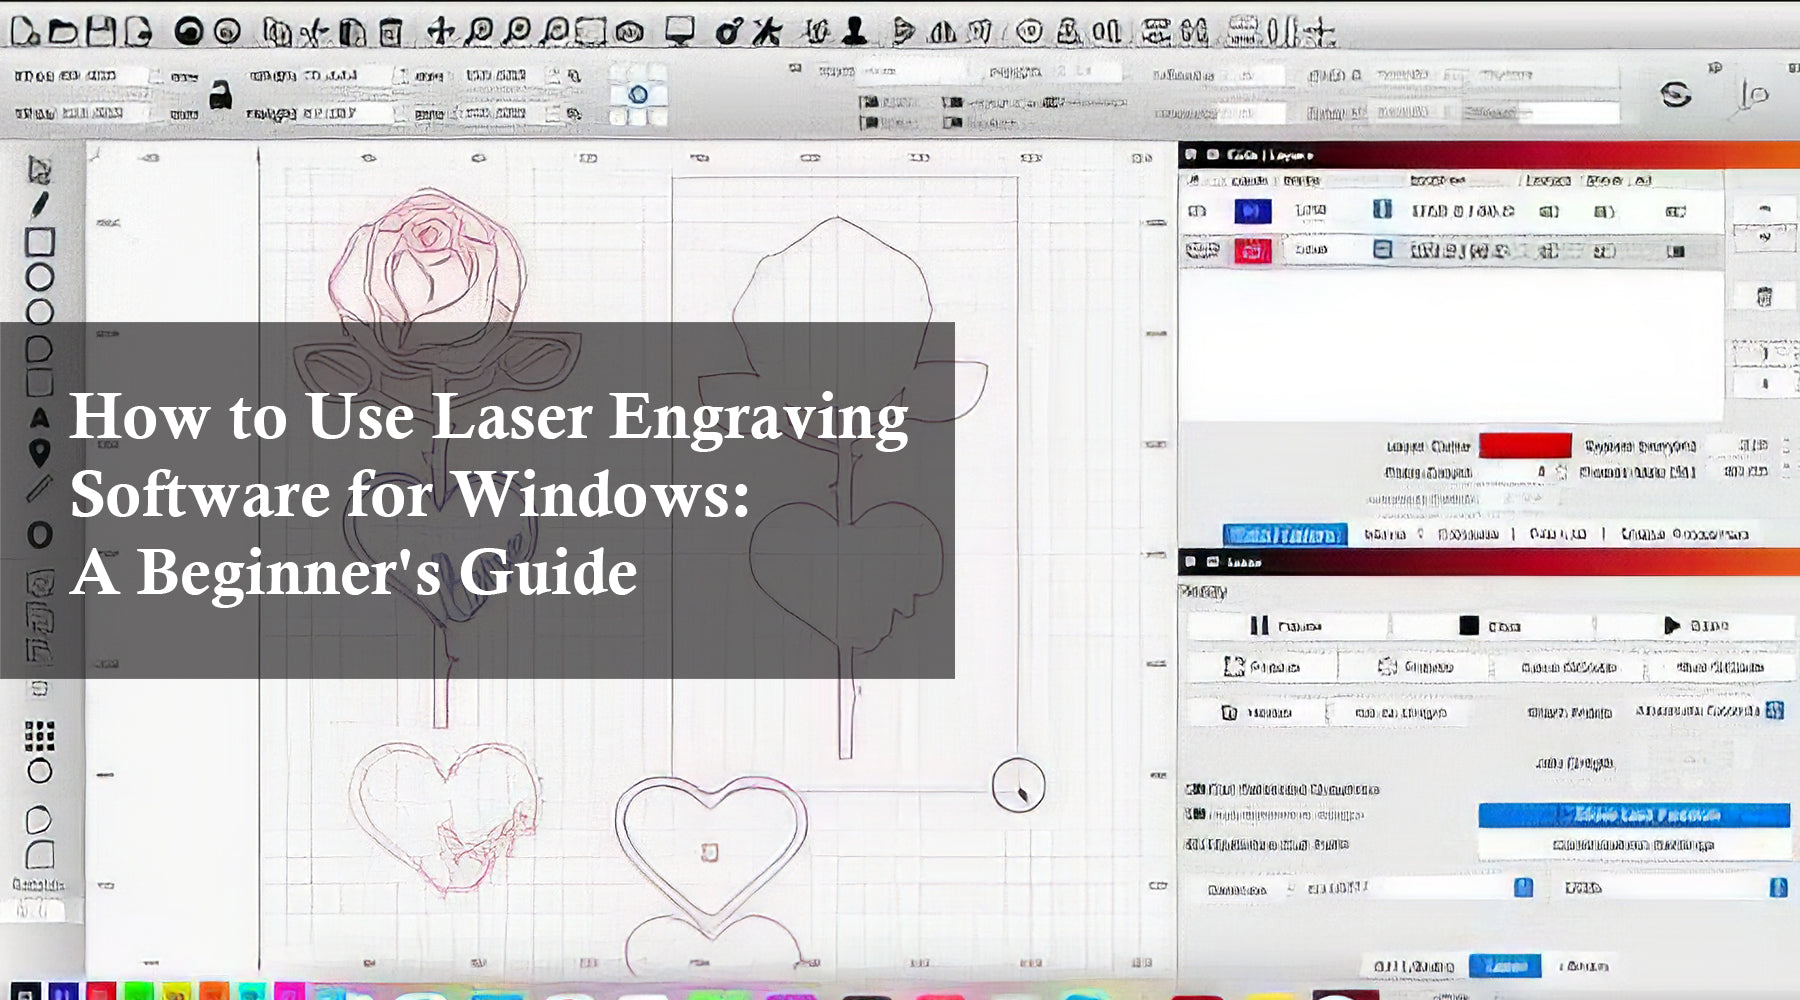 How to Use Laser Engraving Software for Windows: A Beginner's Guide